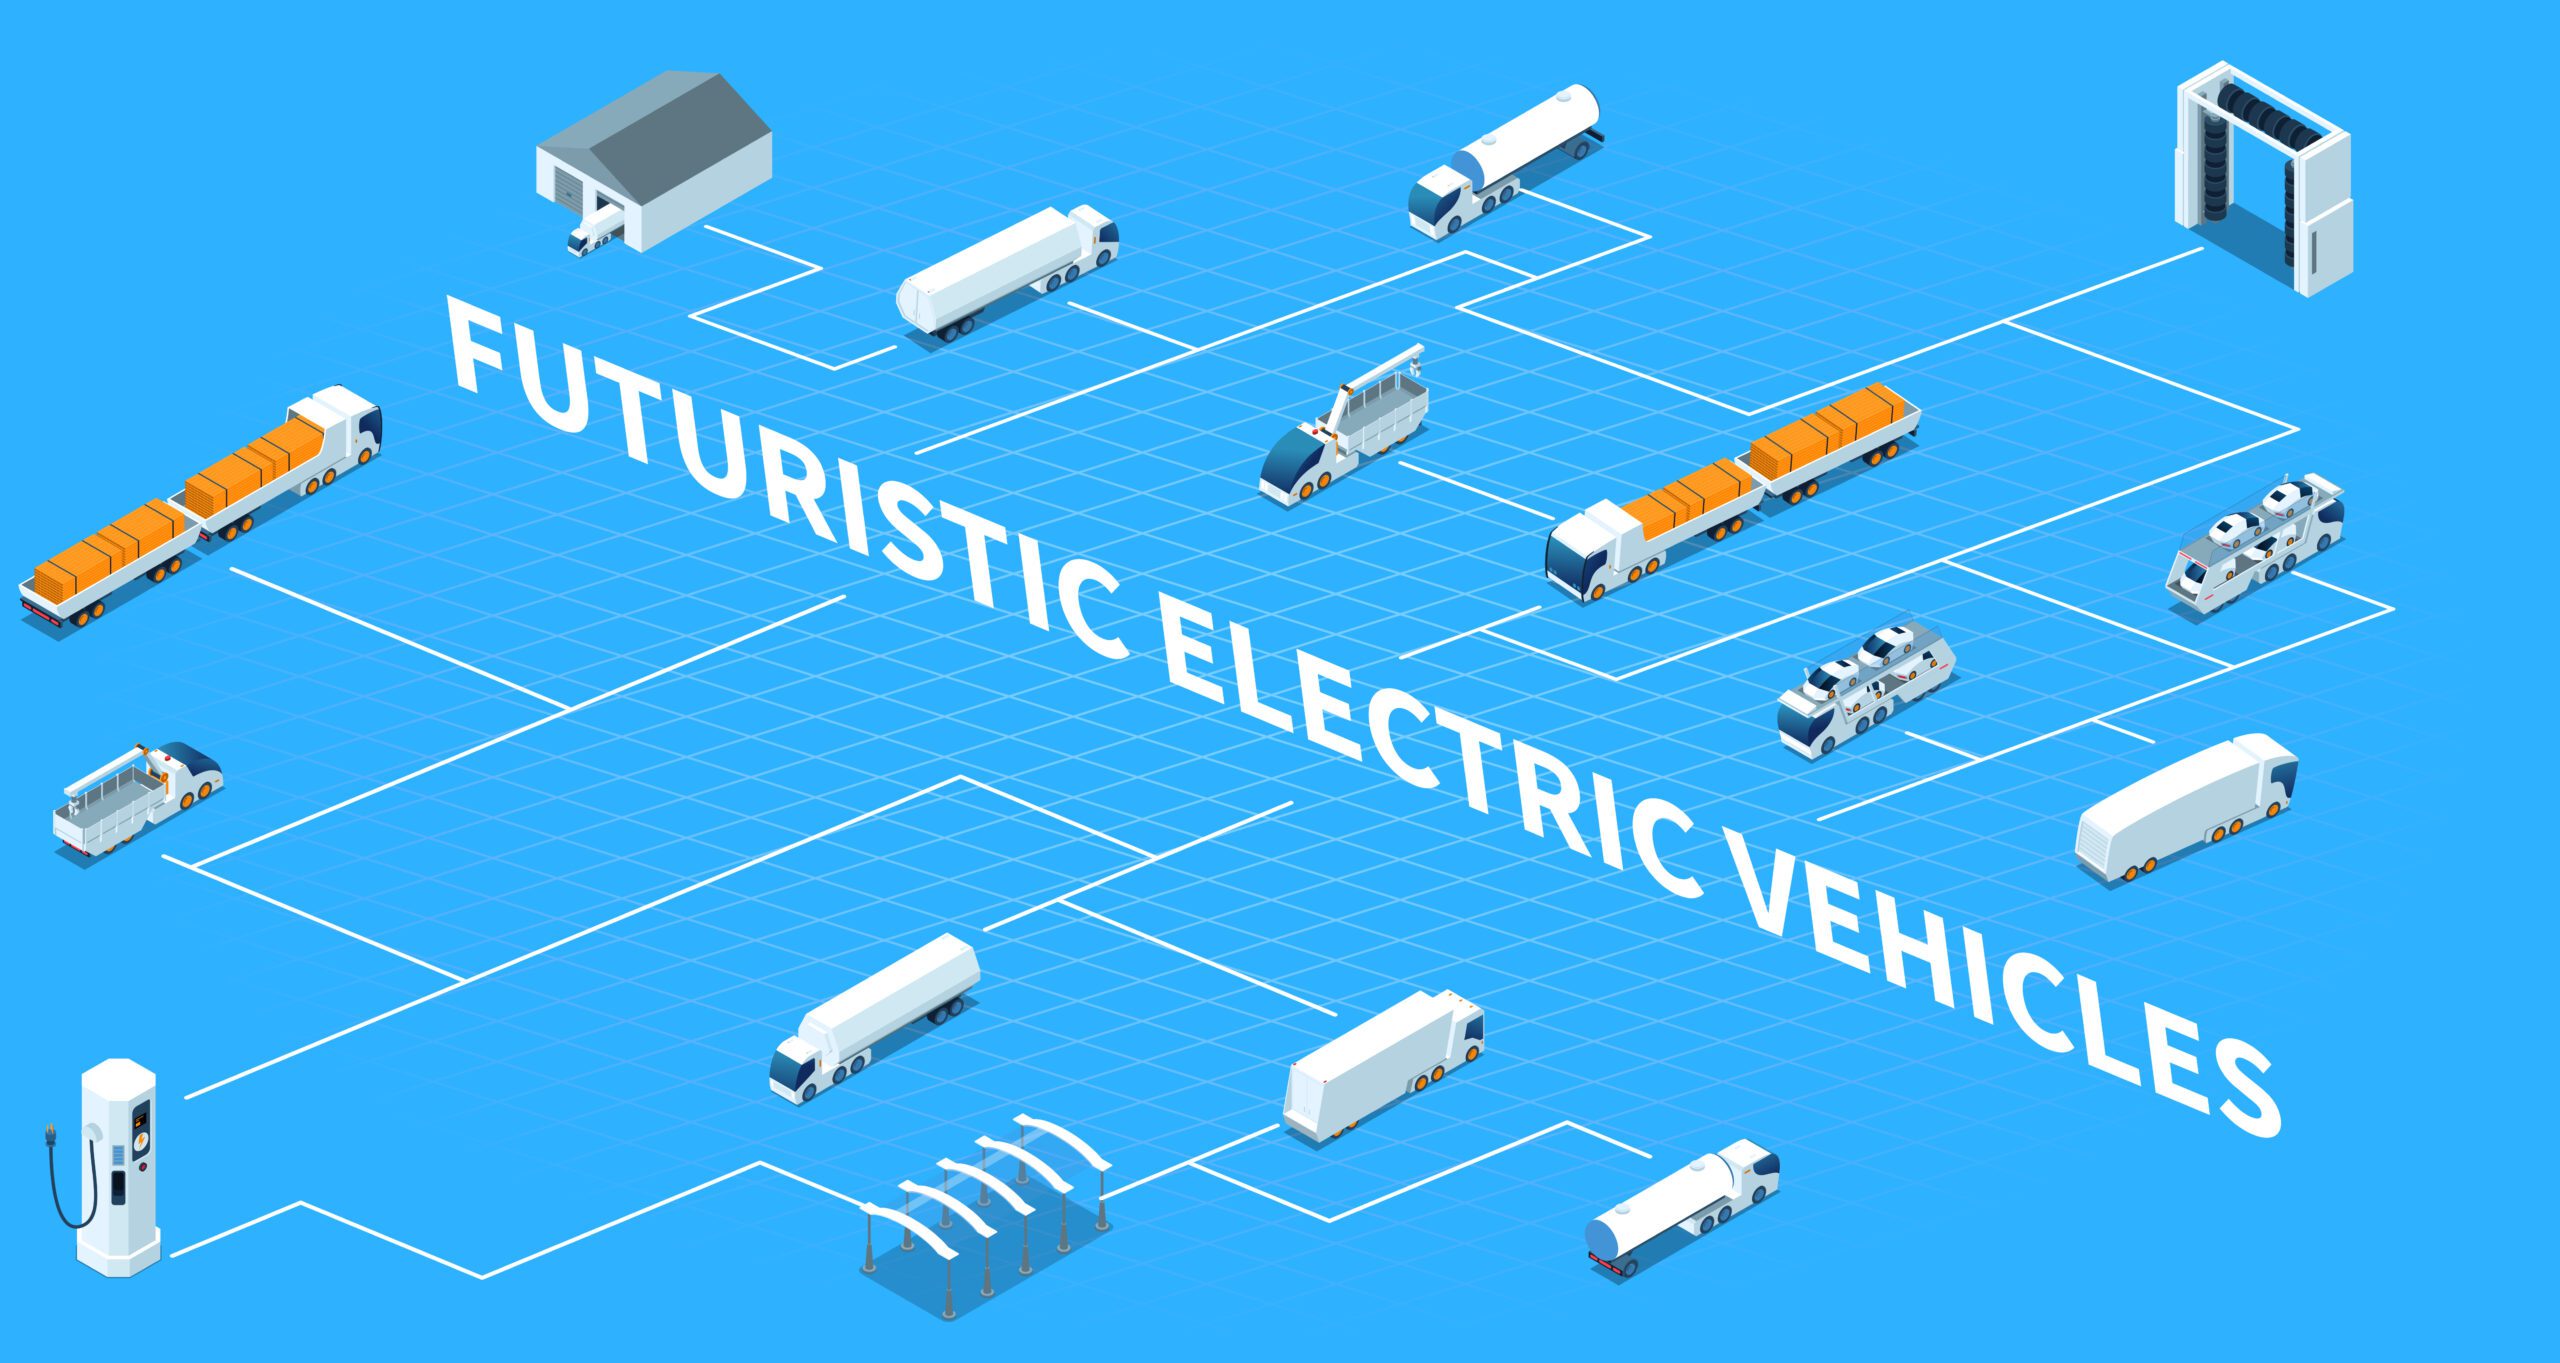 Electric vehicles shaping future